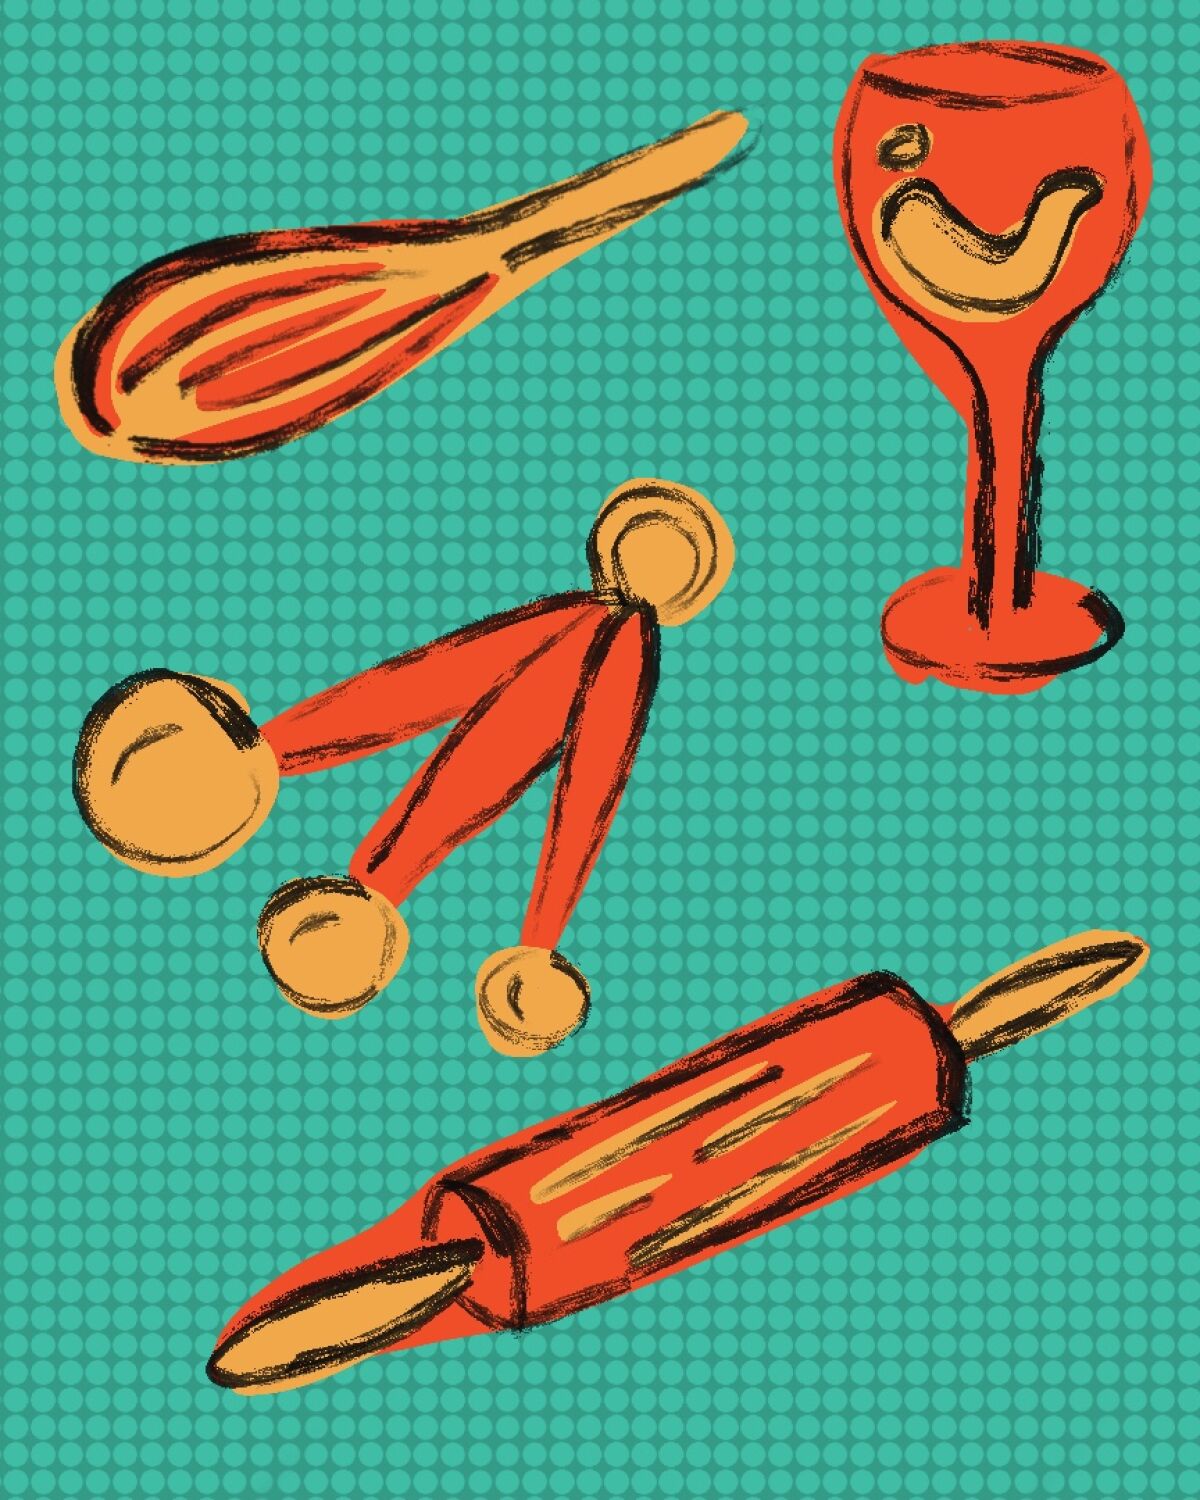 Illustration of baking and cooking utensils and a glass of wine.